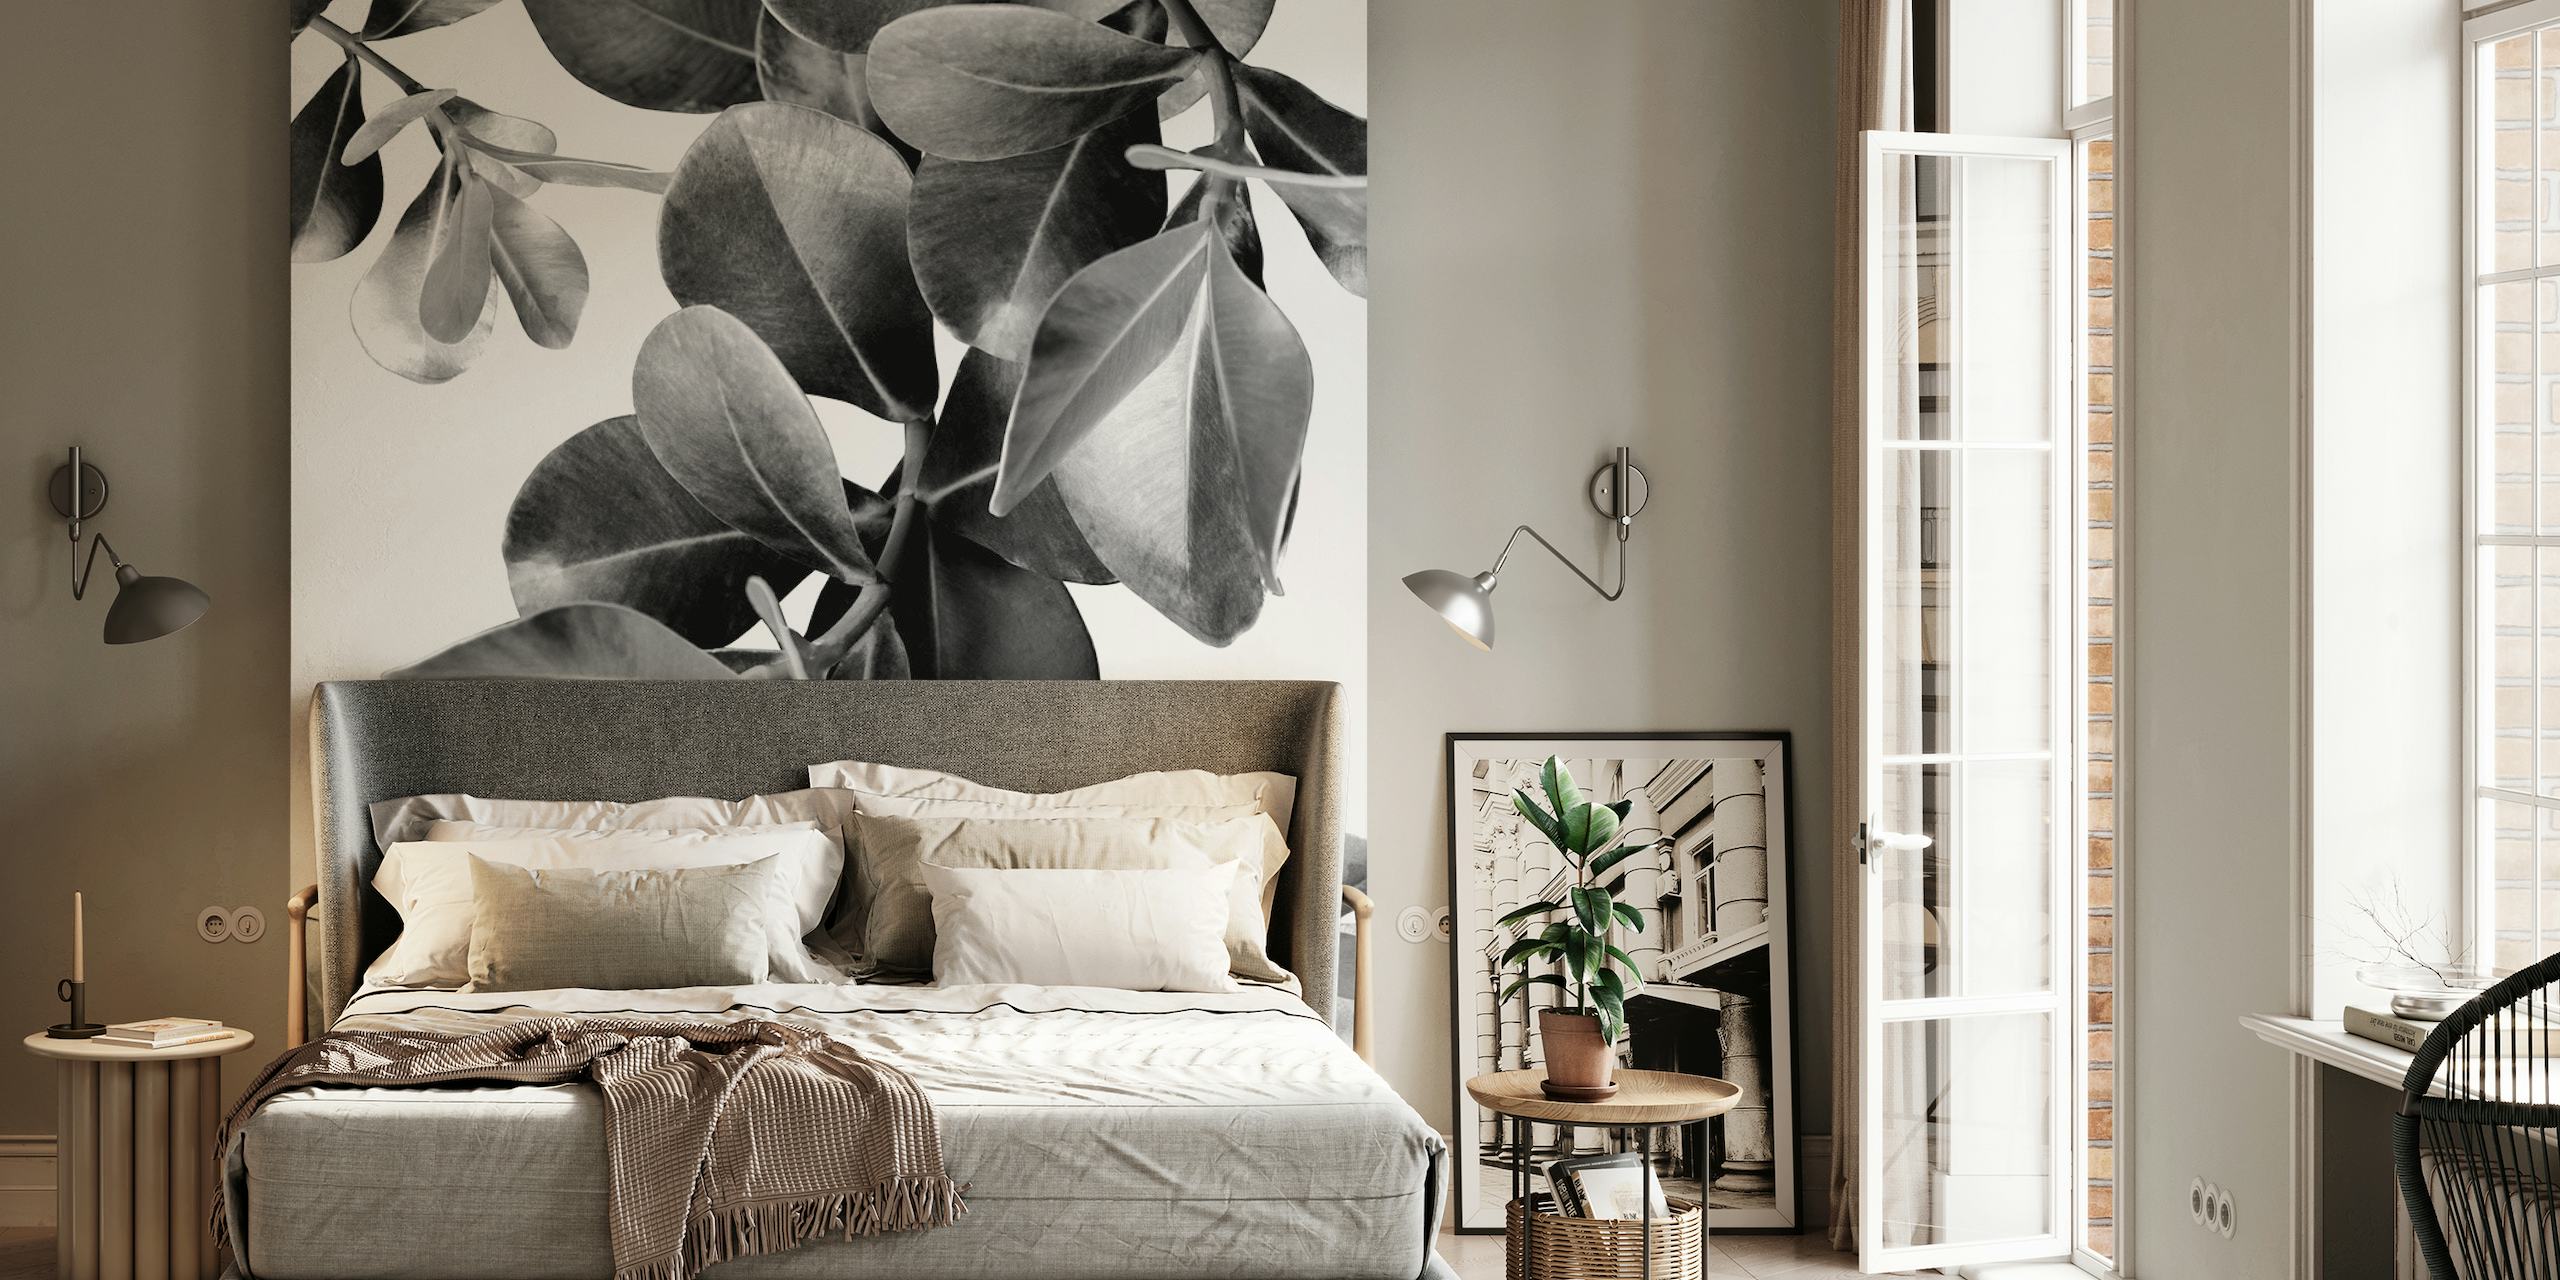 Monochrome wall mural of ficus leaves with serene and natural design from happywall.com